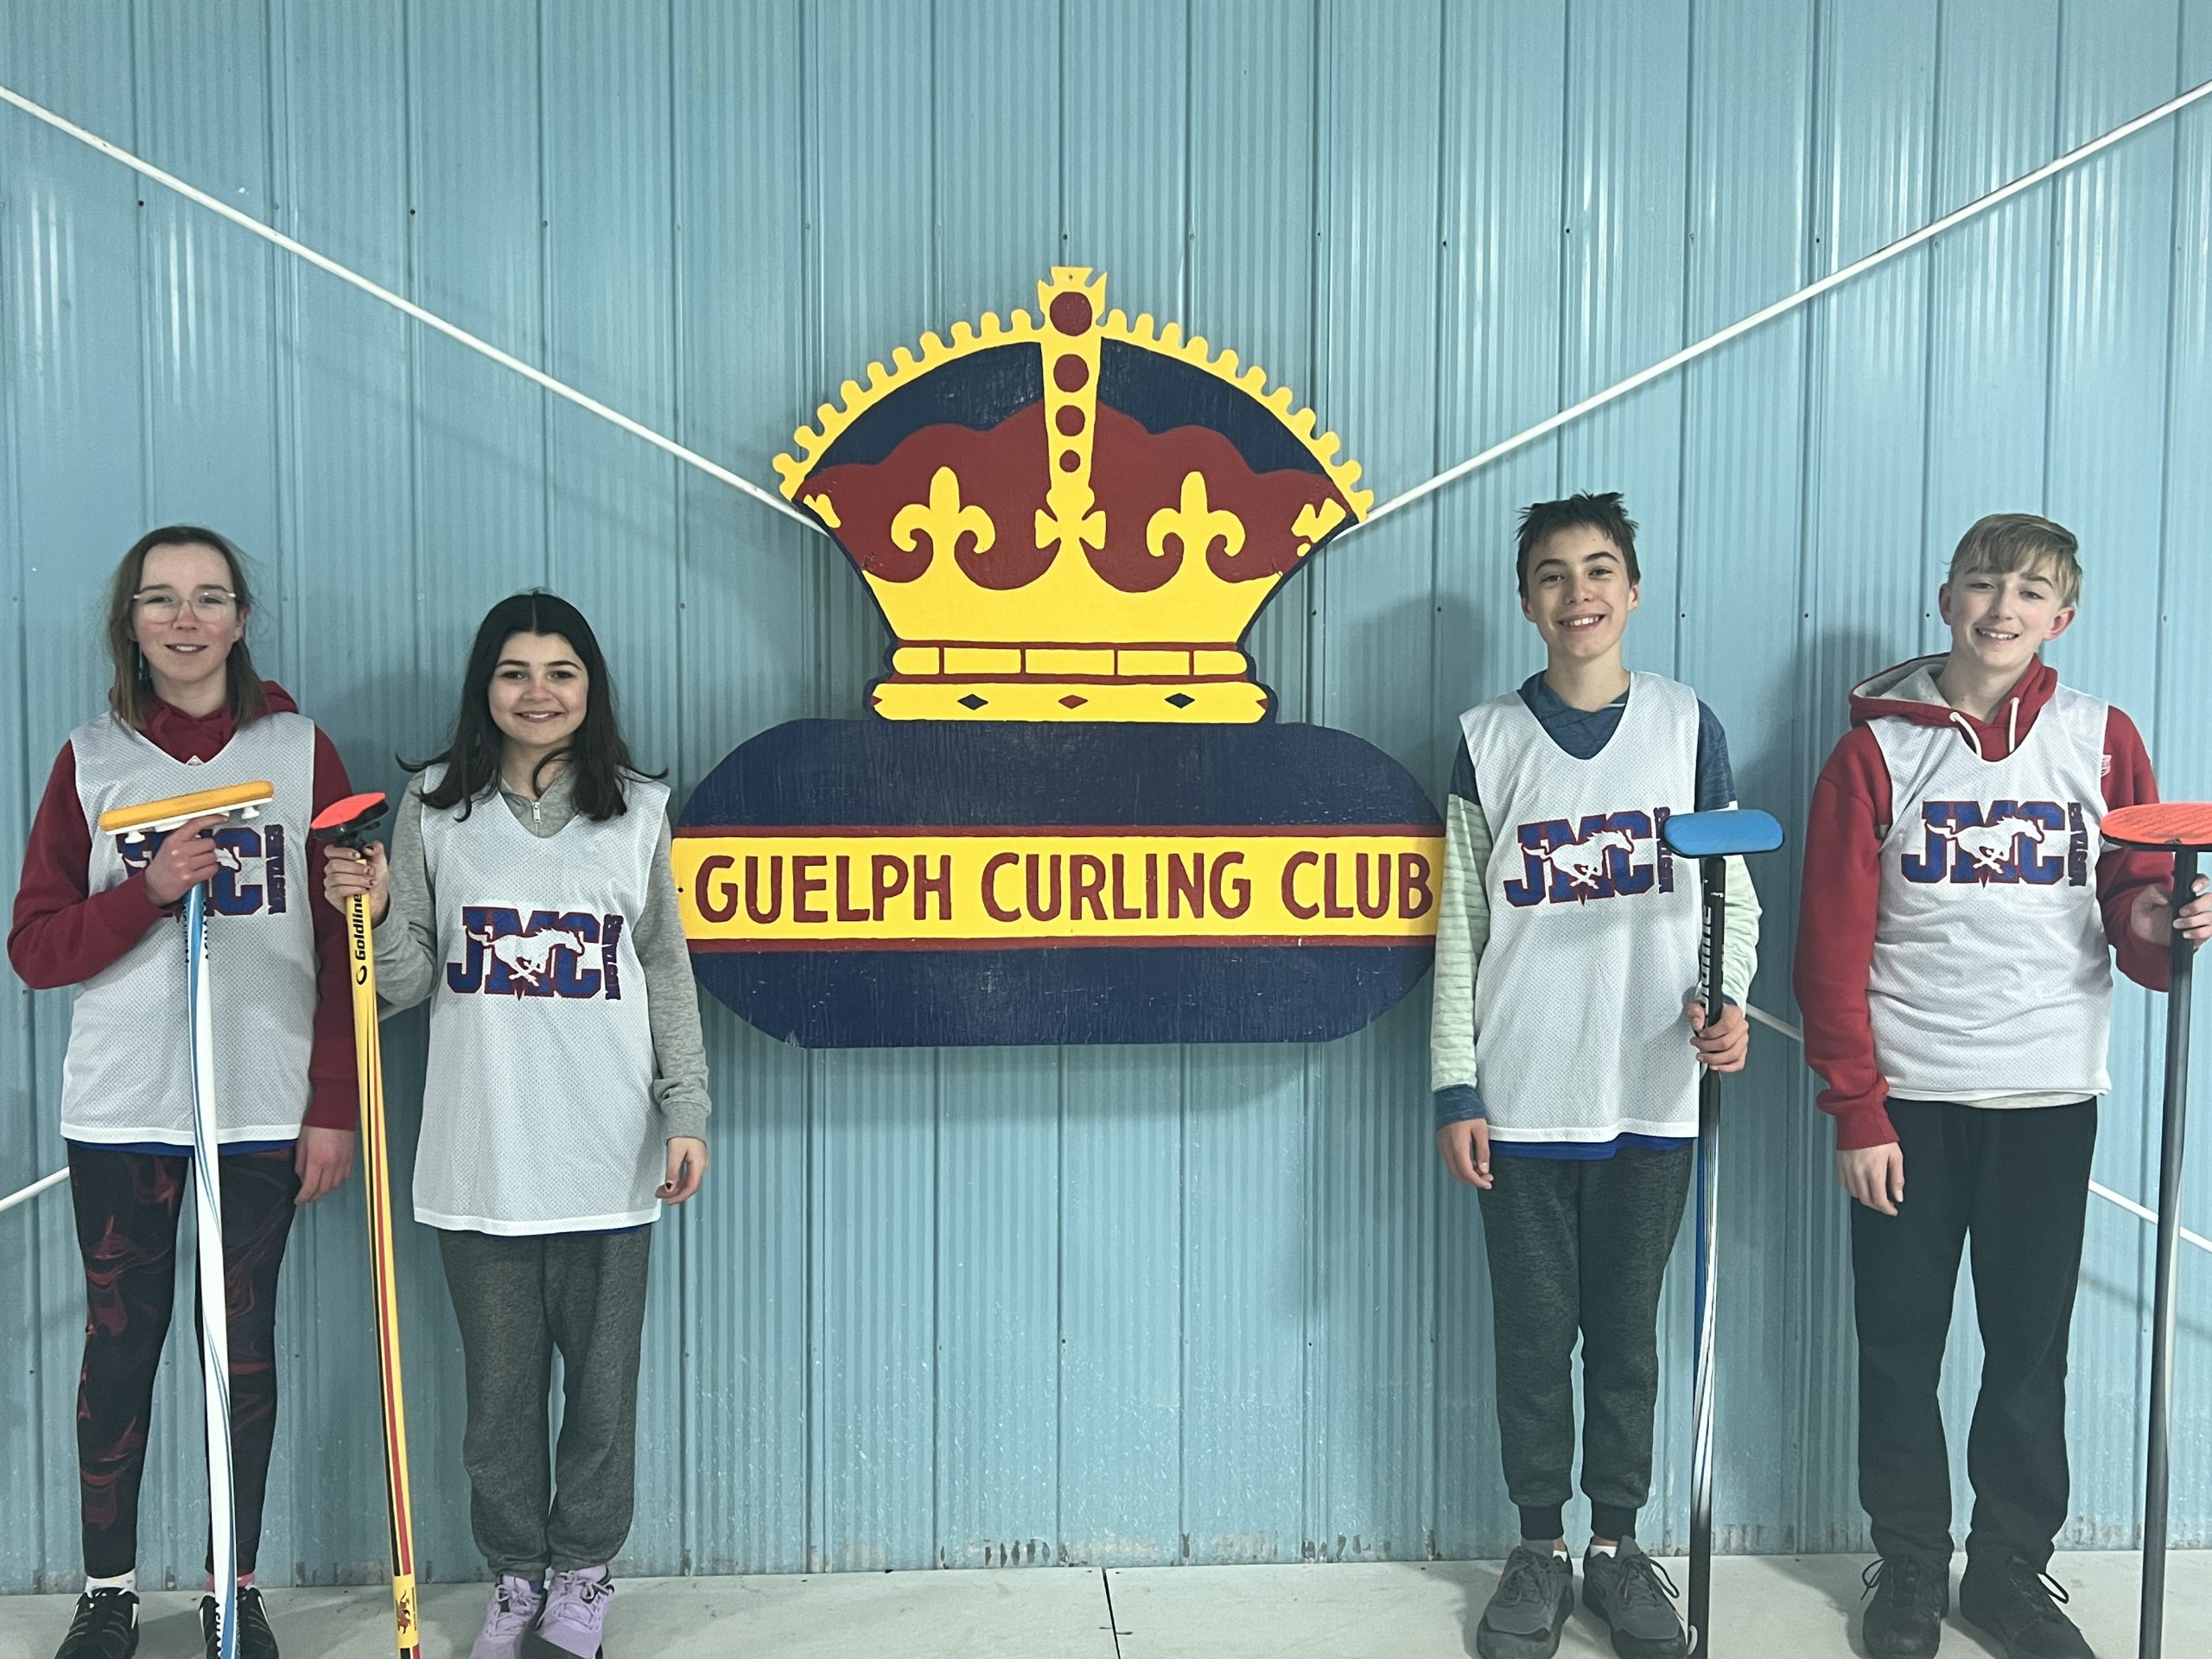 This photo features 2 girls and 2 boys with curling stick outside the Guelph Curling Club.